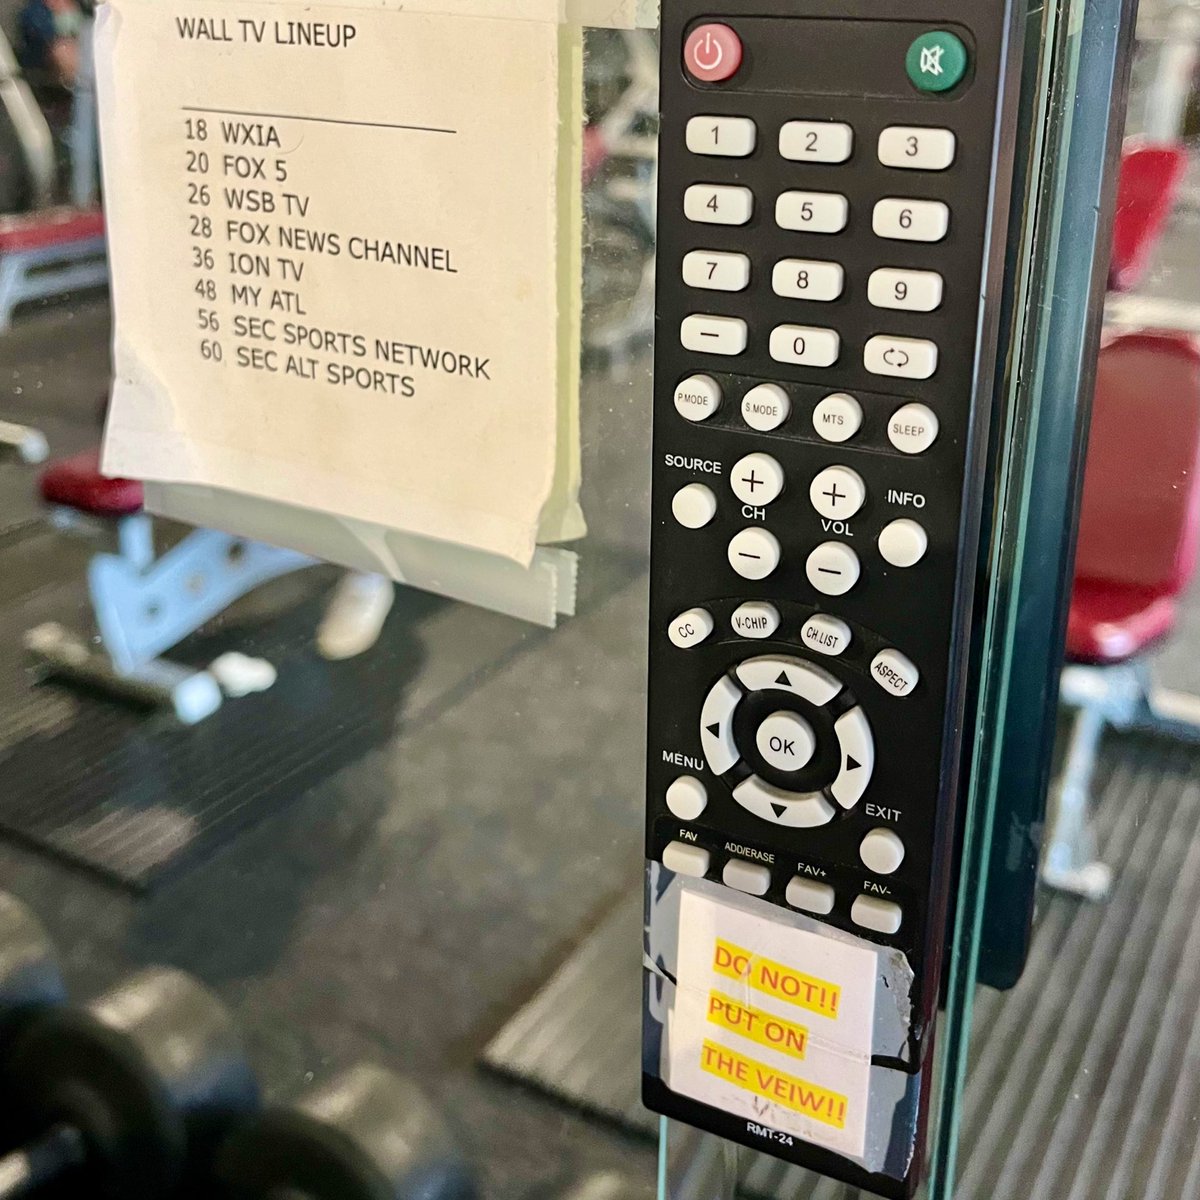 No “The View” at the gym.